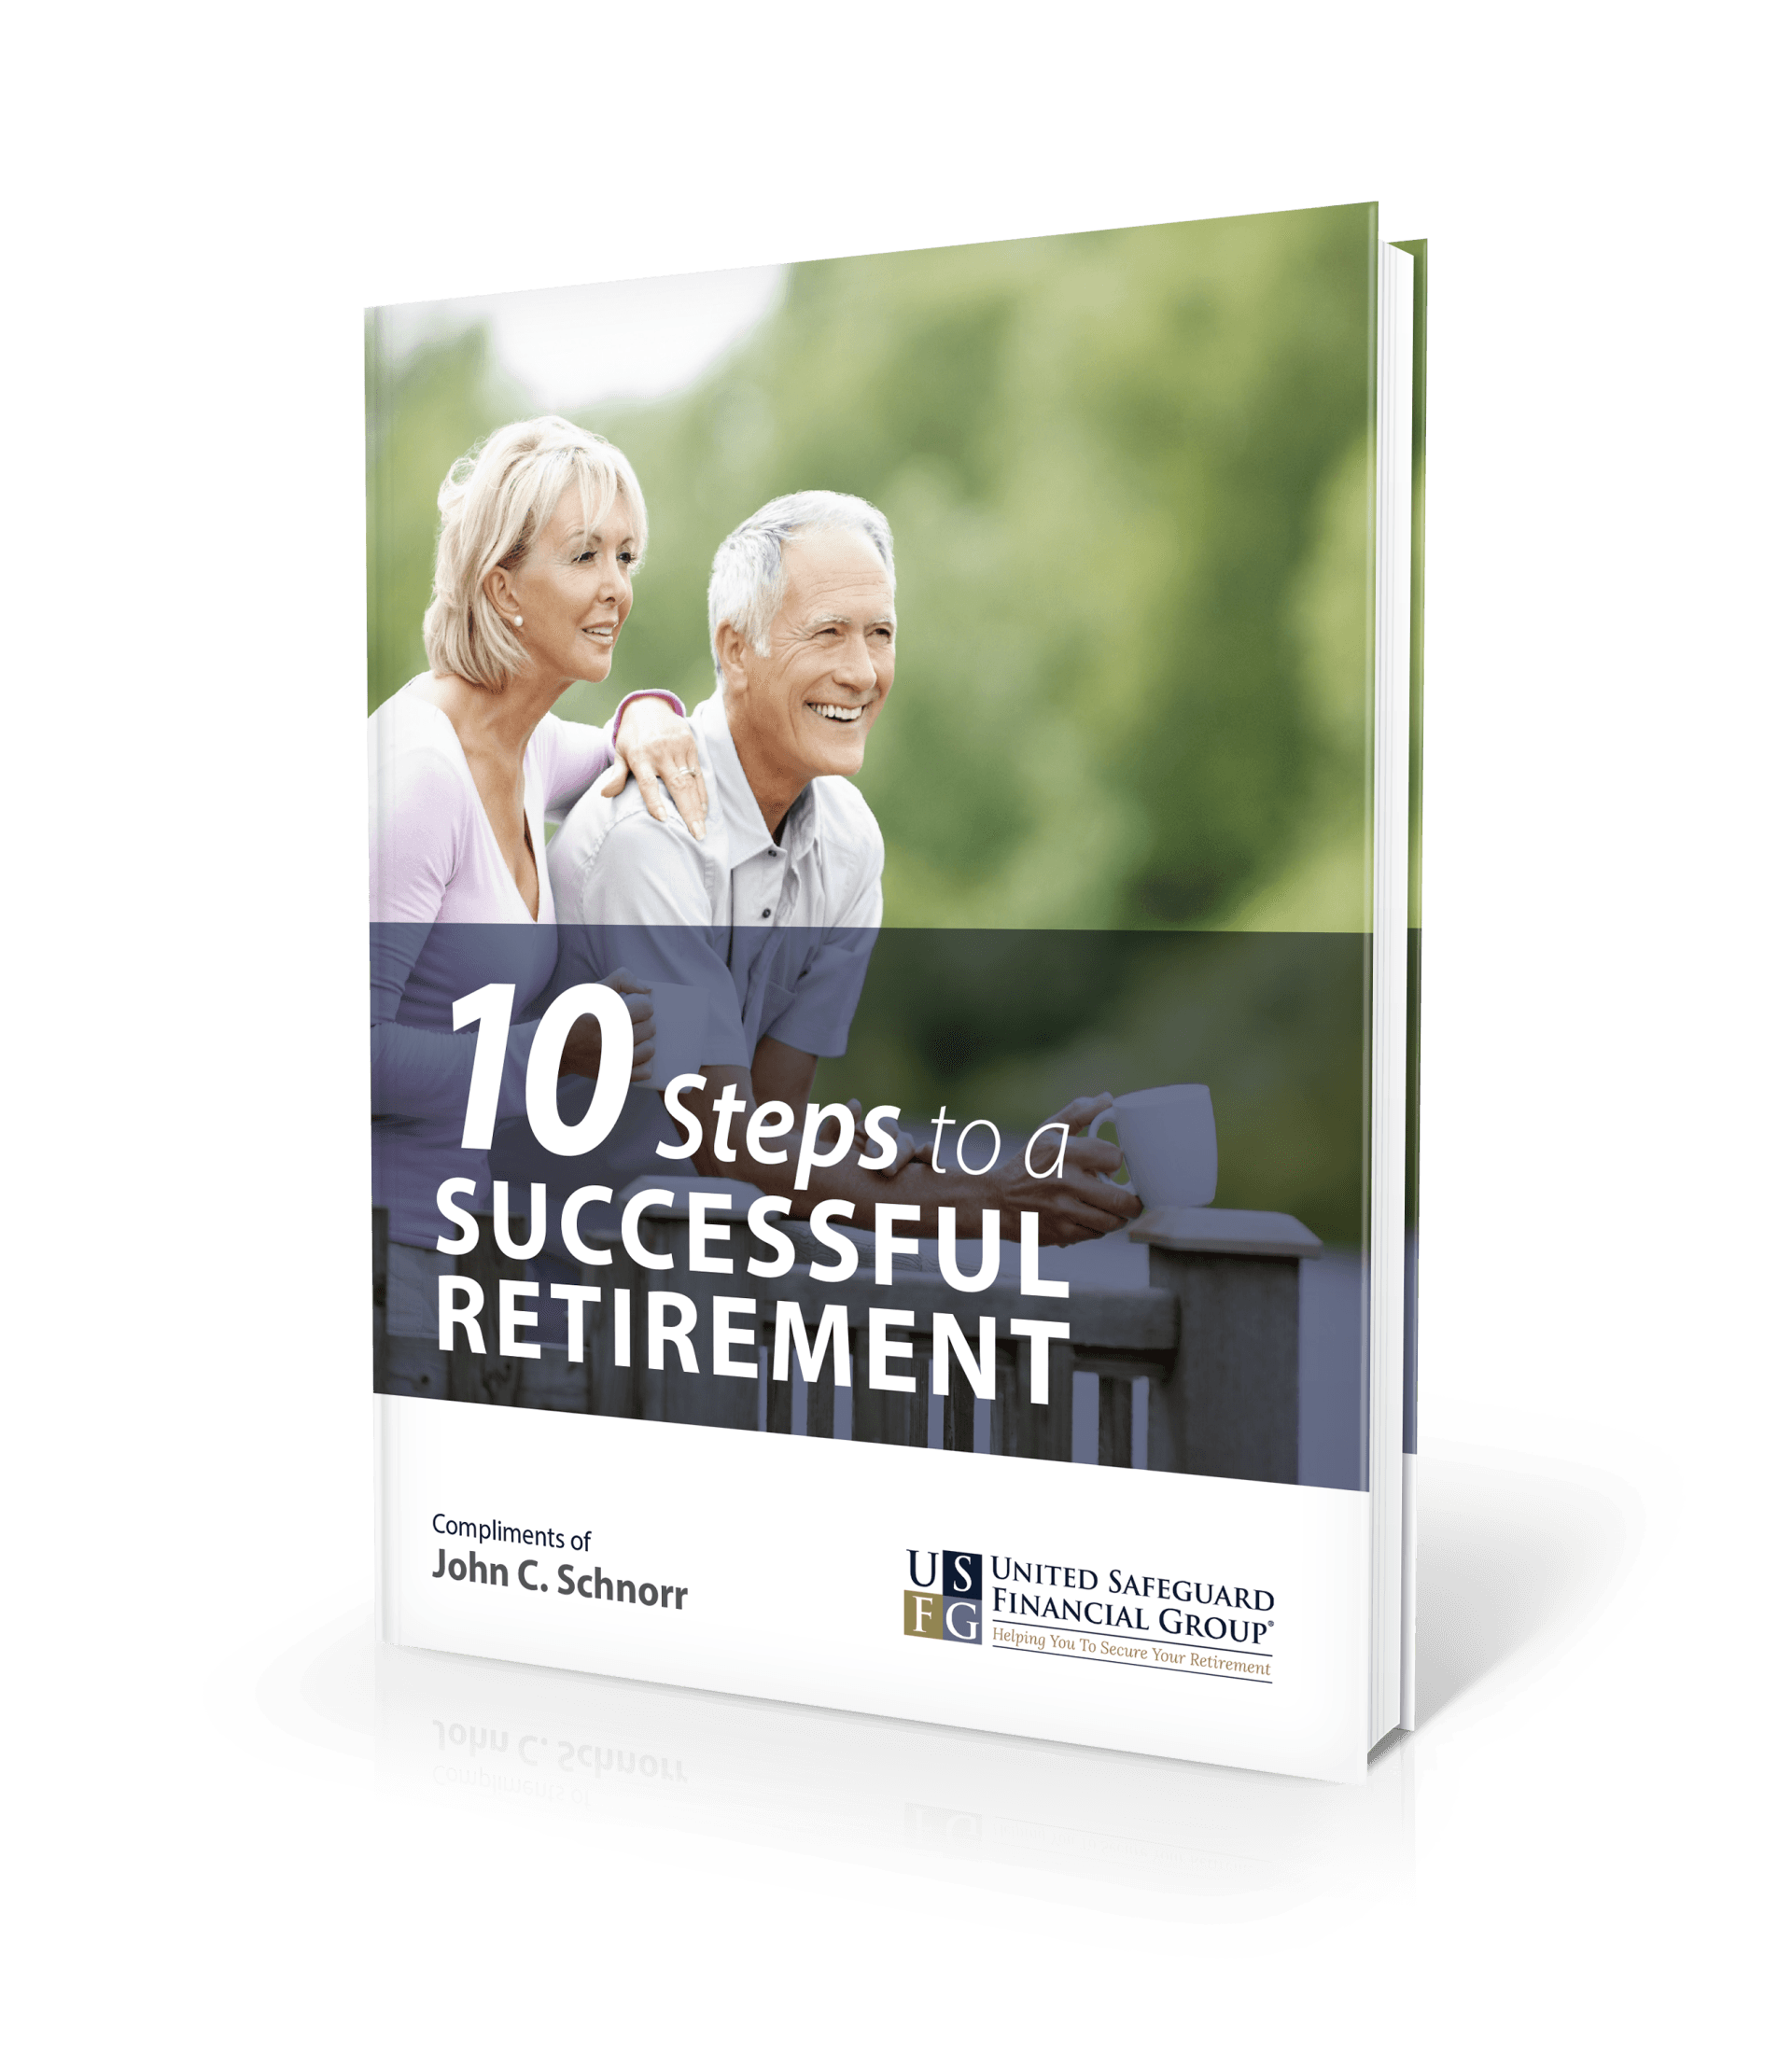 10 steps to a successful retirement guide